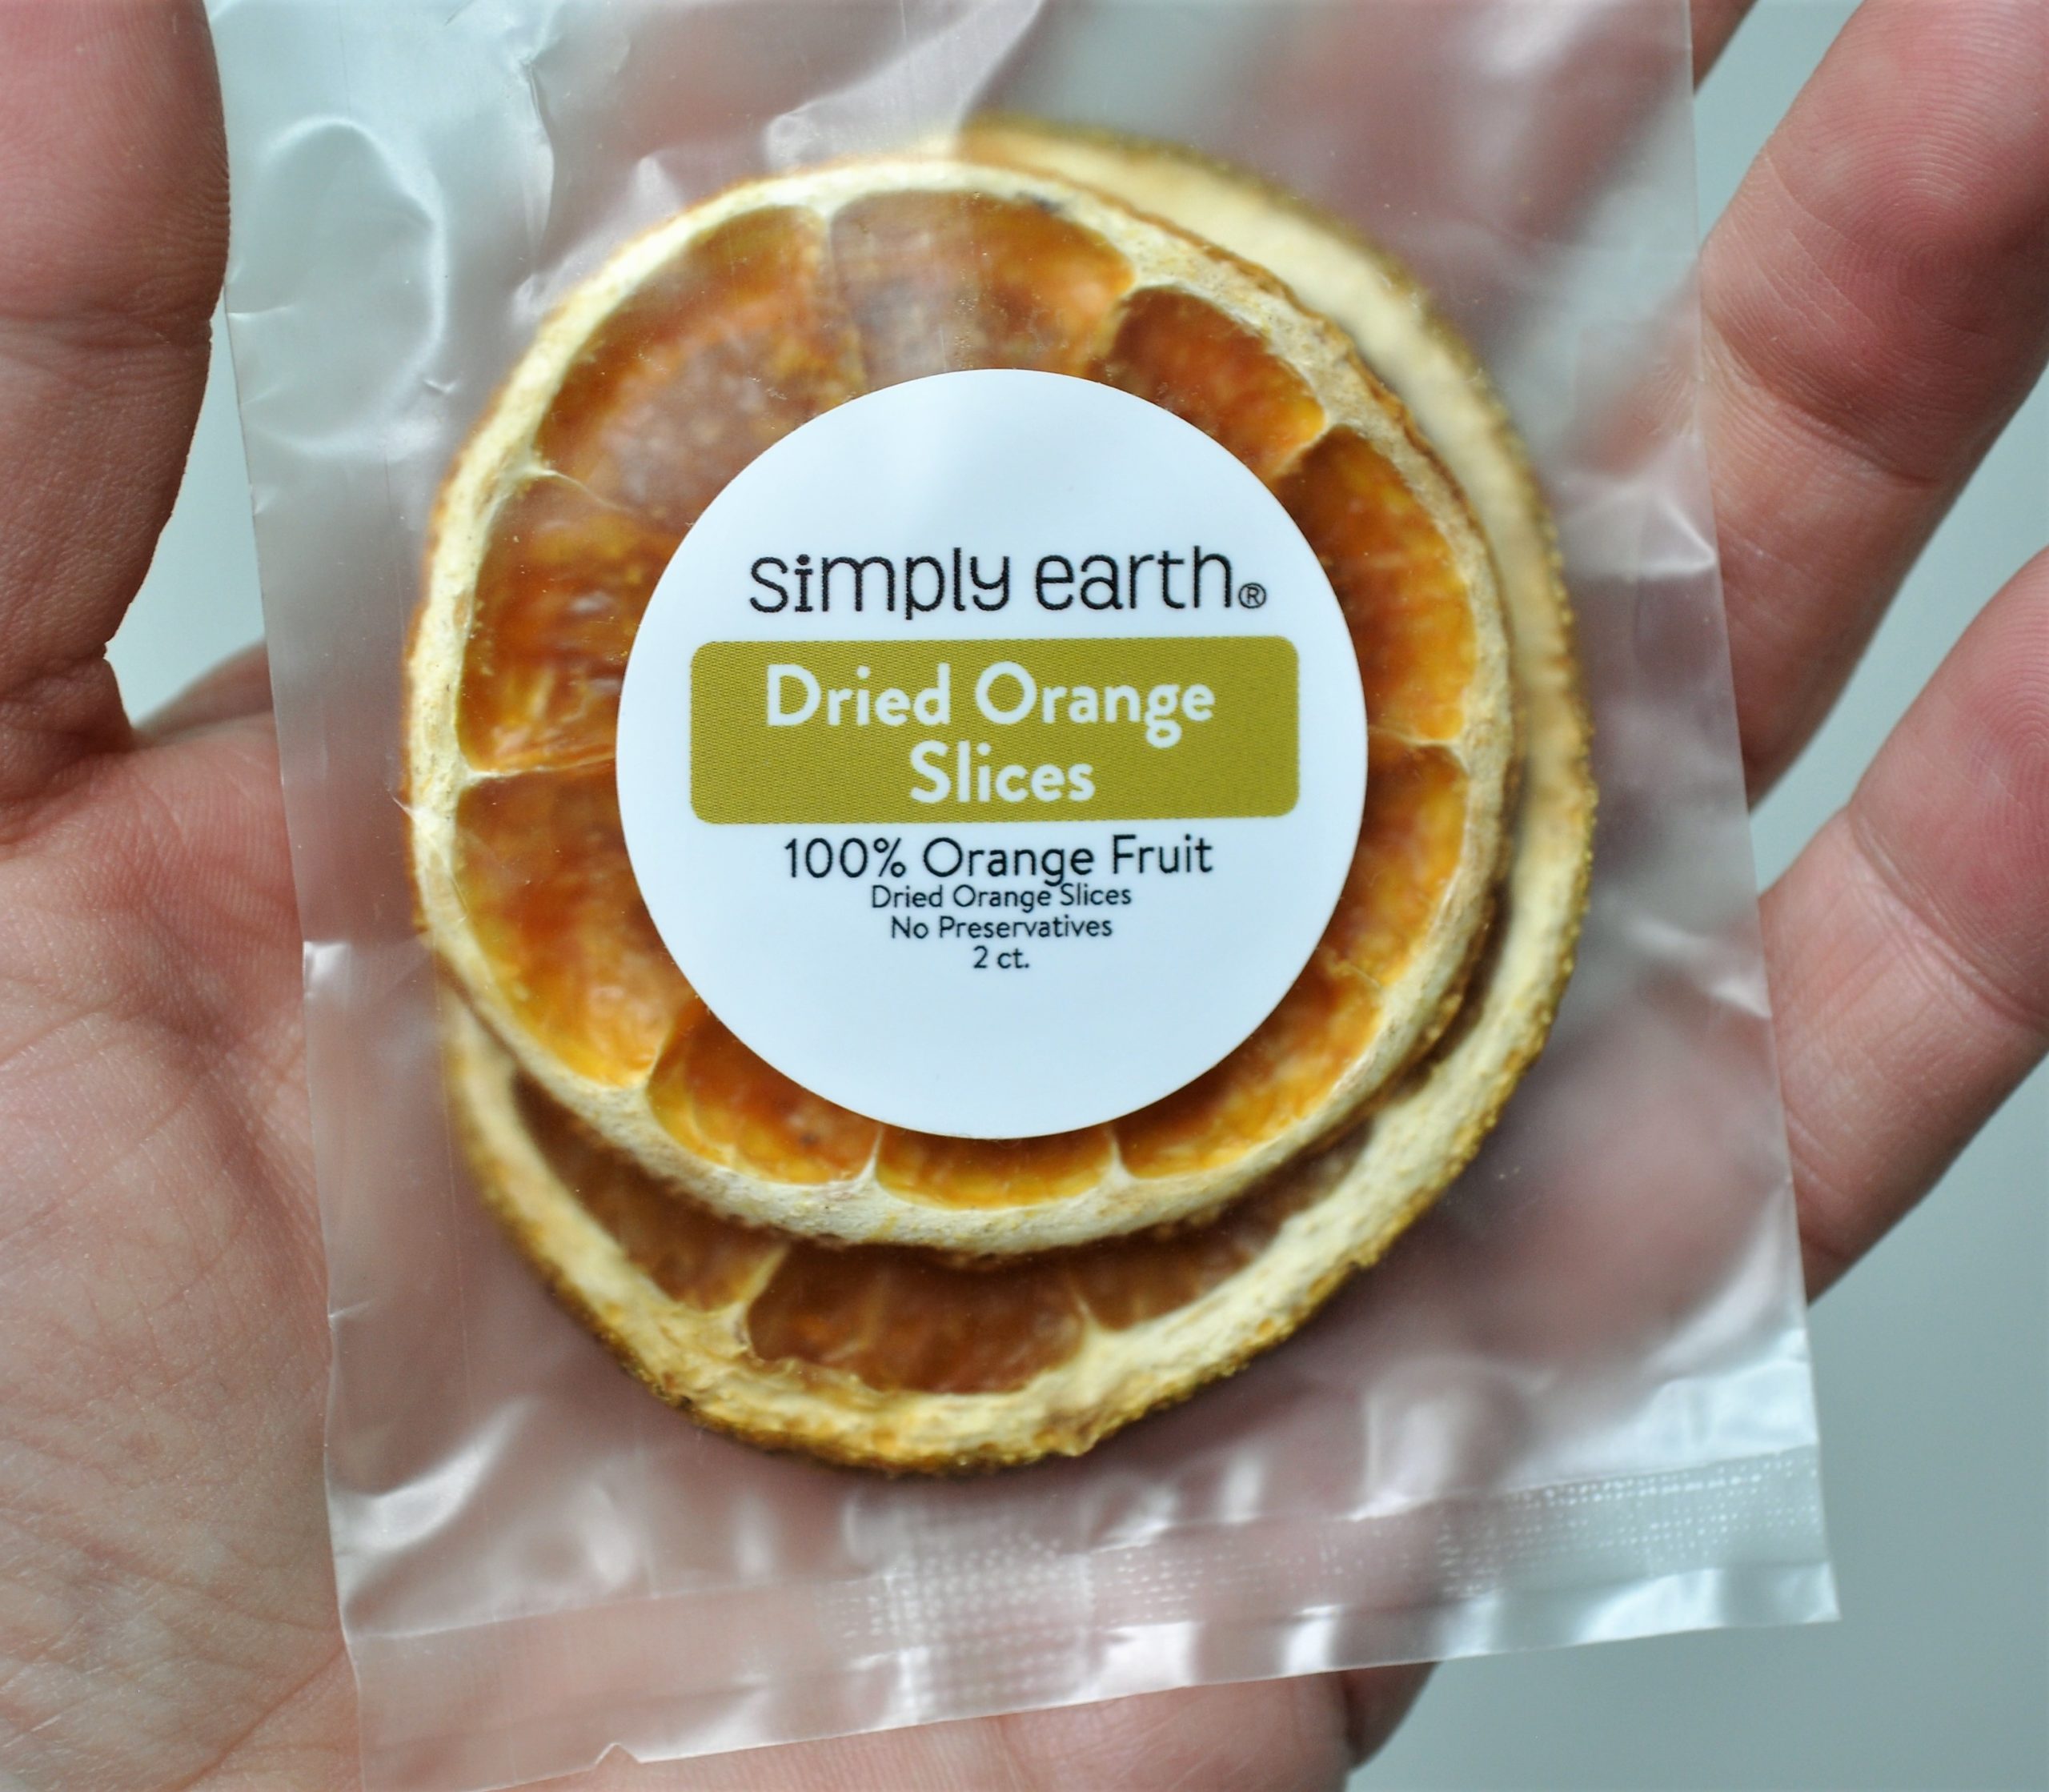 Simply Earth Dried Orange Slices 1 December 2020